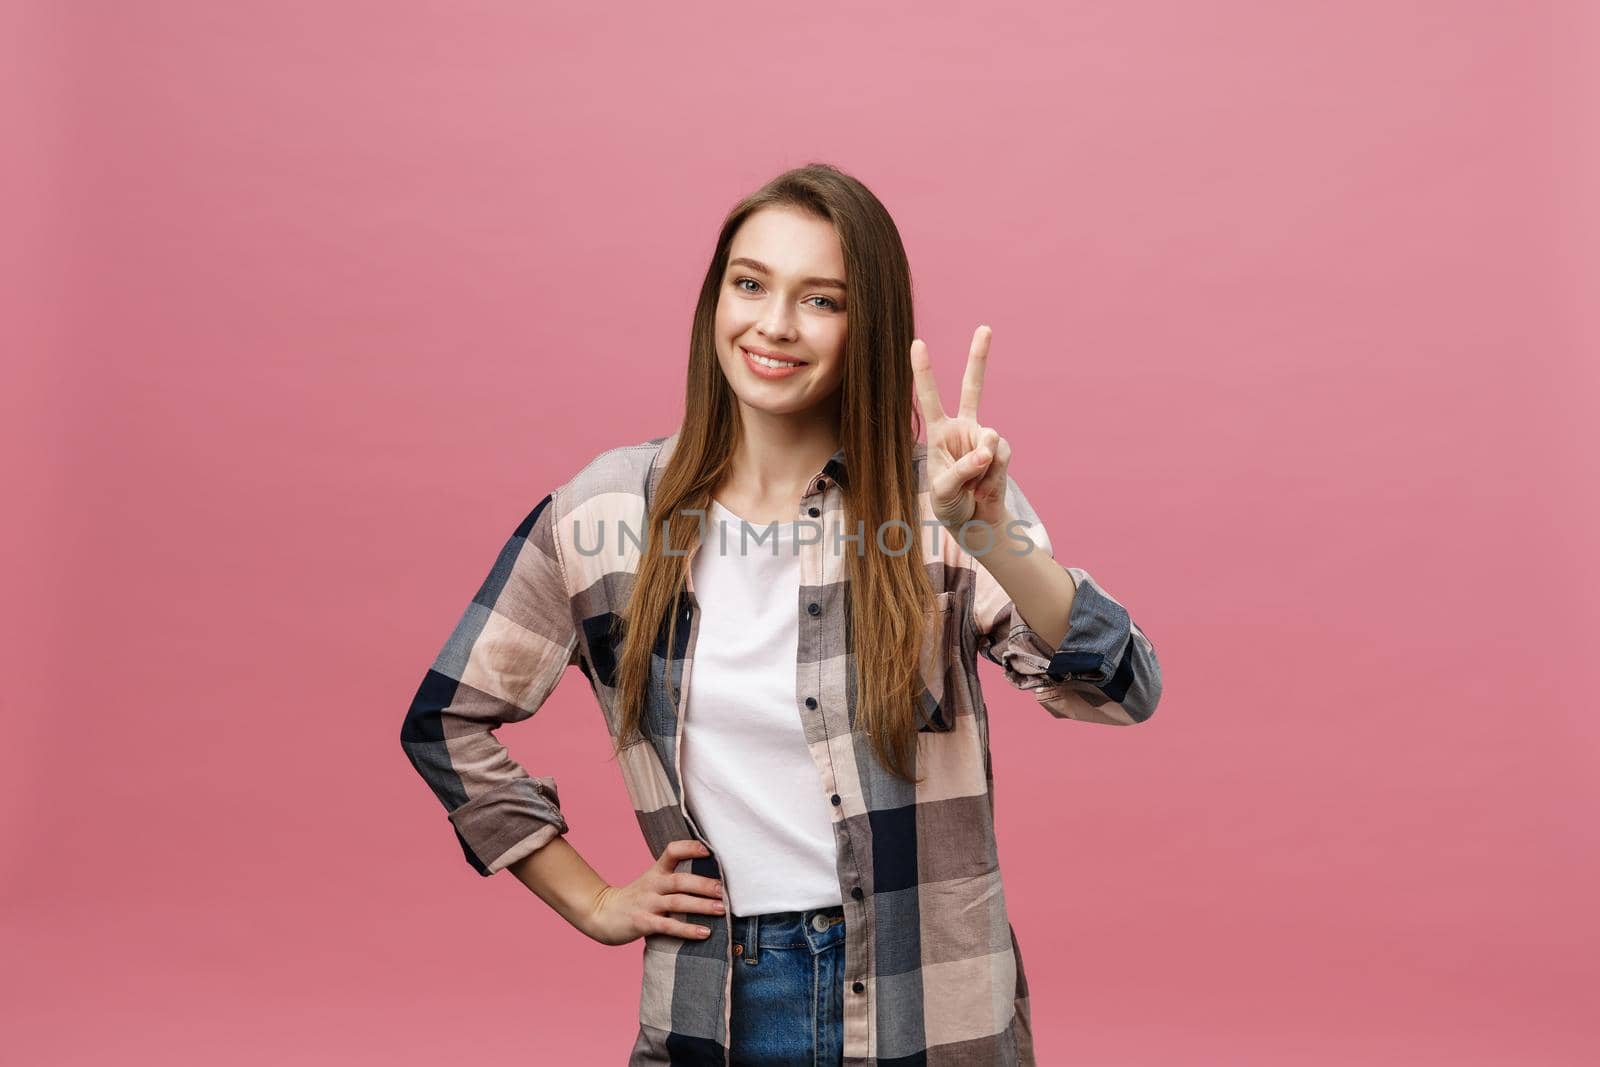 Young caucasian woman over isolated background smiling looking to the camera showing fingers doing victory sign. Number two.